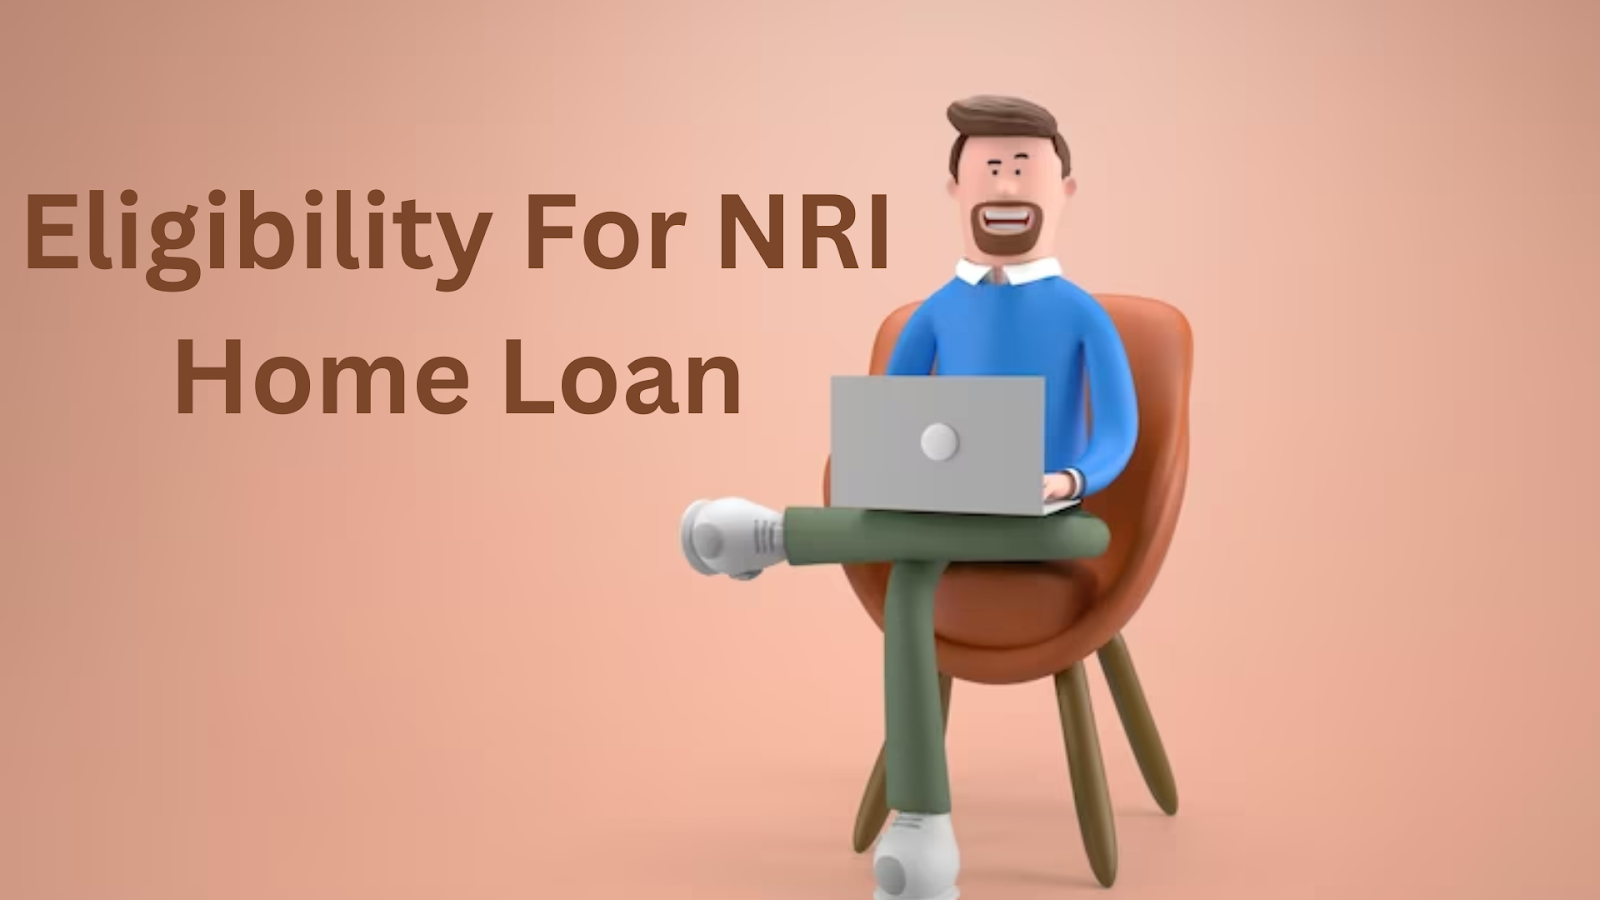 Check your eligibility for an NRI home loan in India.